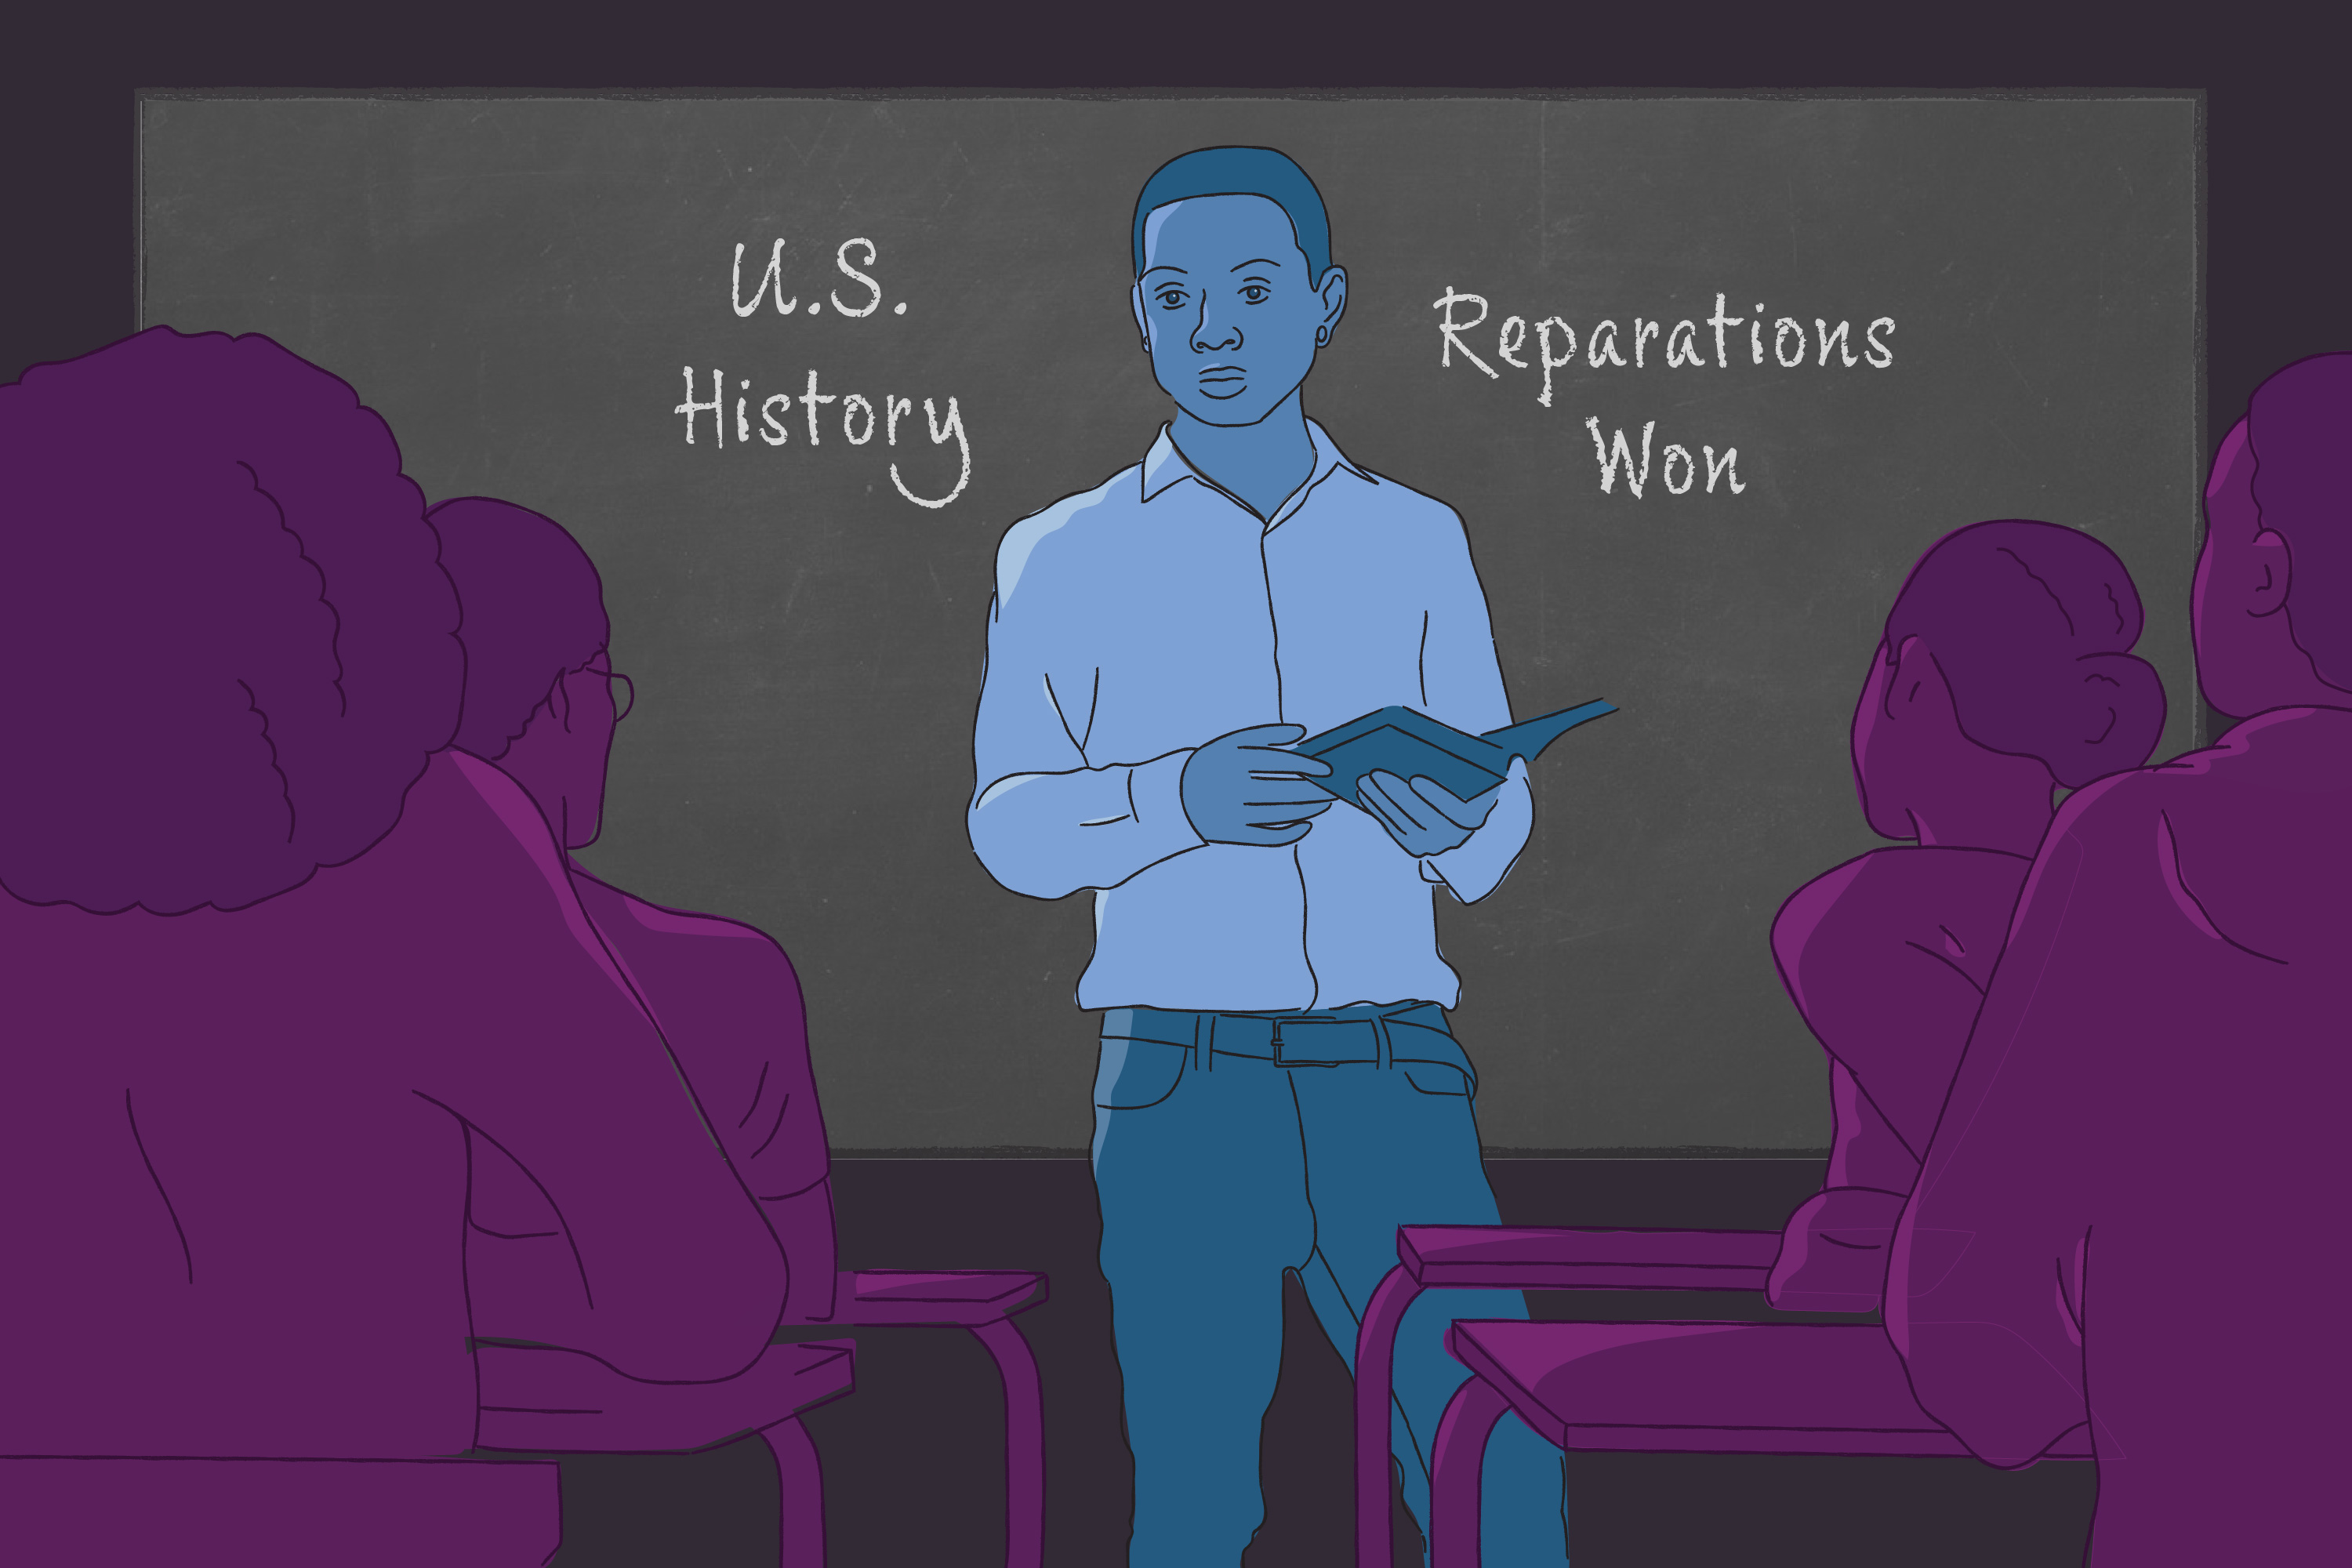 The illustration shows a teacher standing in front of a class of high school students. The blackboard behind him reads “U.S. History” and “Reparations Won.”